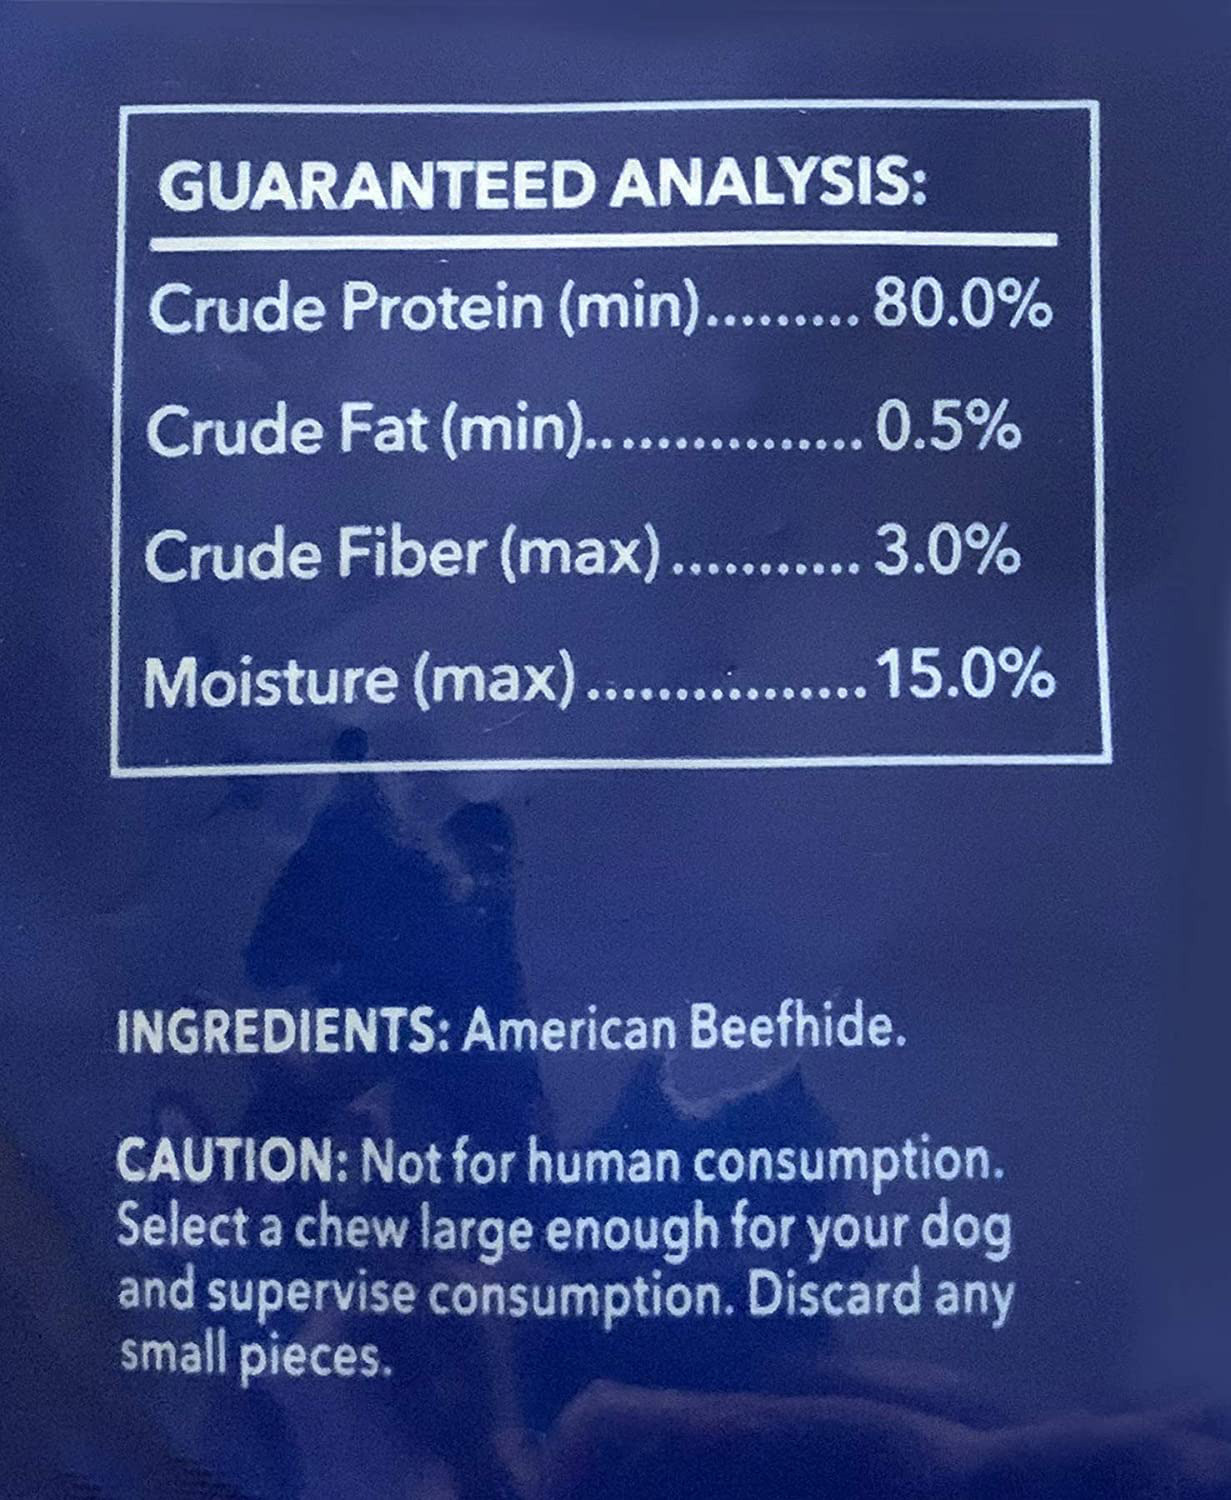 Pet Factory Natural Beefhide Dog Treats 78208, Made in USA, Digestive 8-Inch Retriever Dog Chew Rolls, No Artificial Preservatives or Additives, 10-Pack. Resealable Package Animals & Pet Supplies > Pet Supplies > Dog Supplies > Dog Treats Pet Factory   